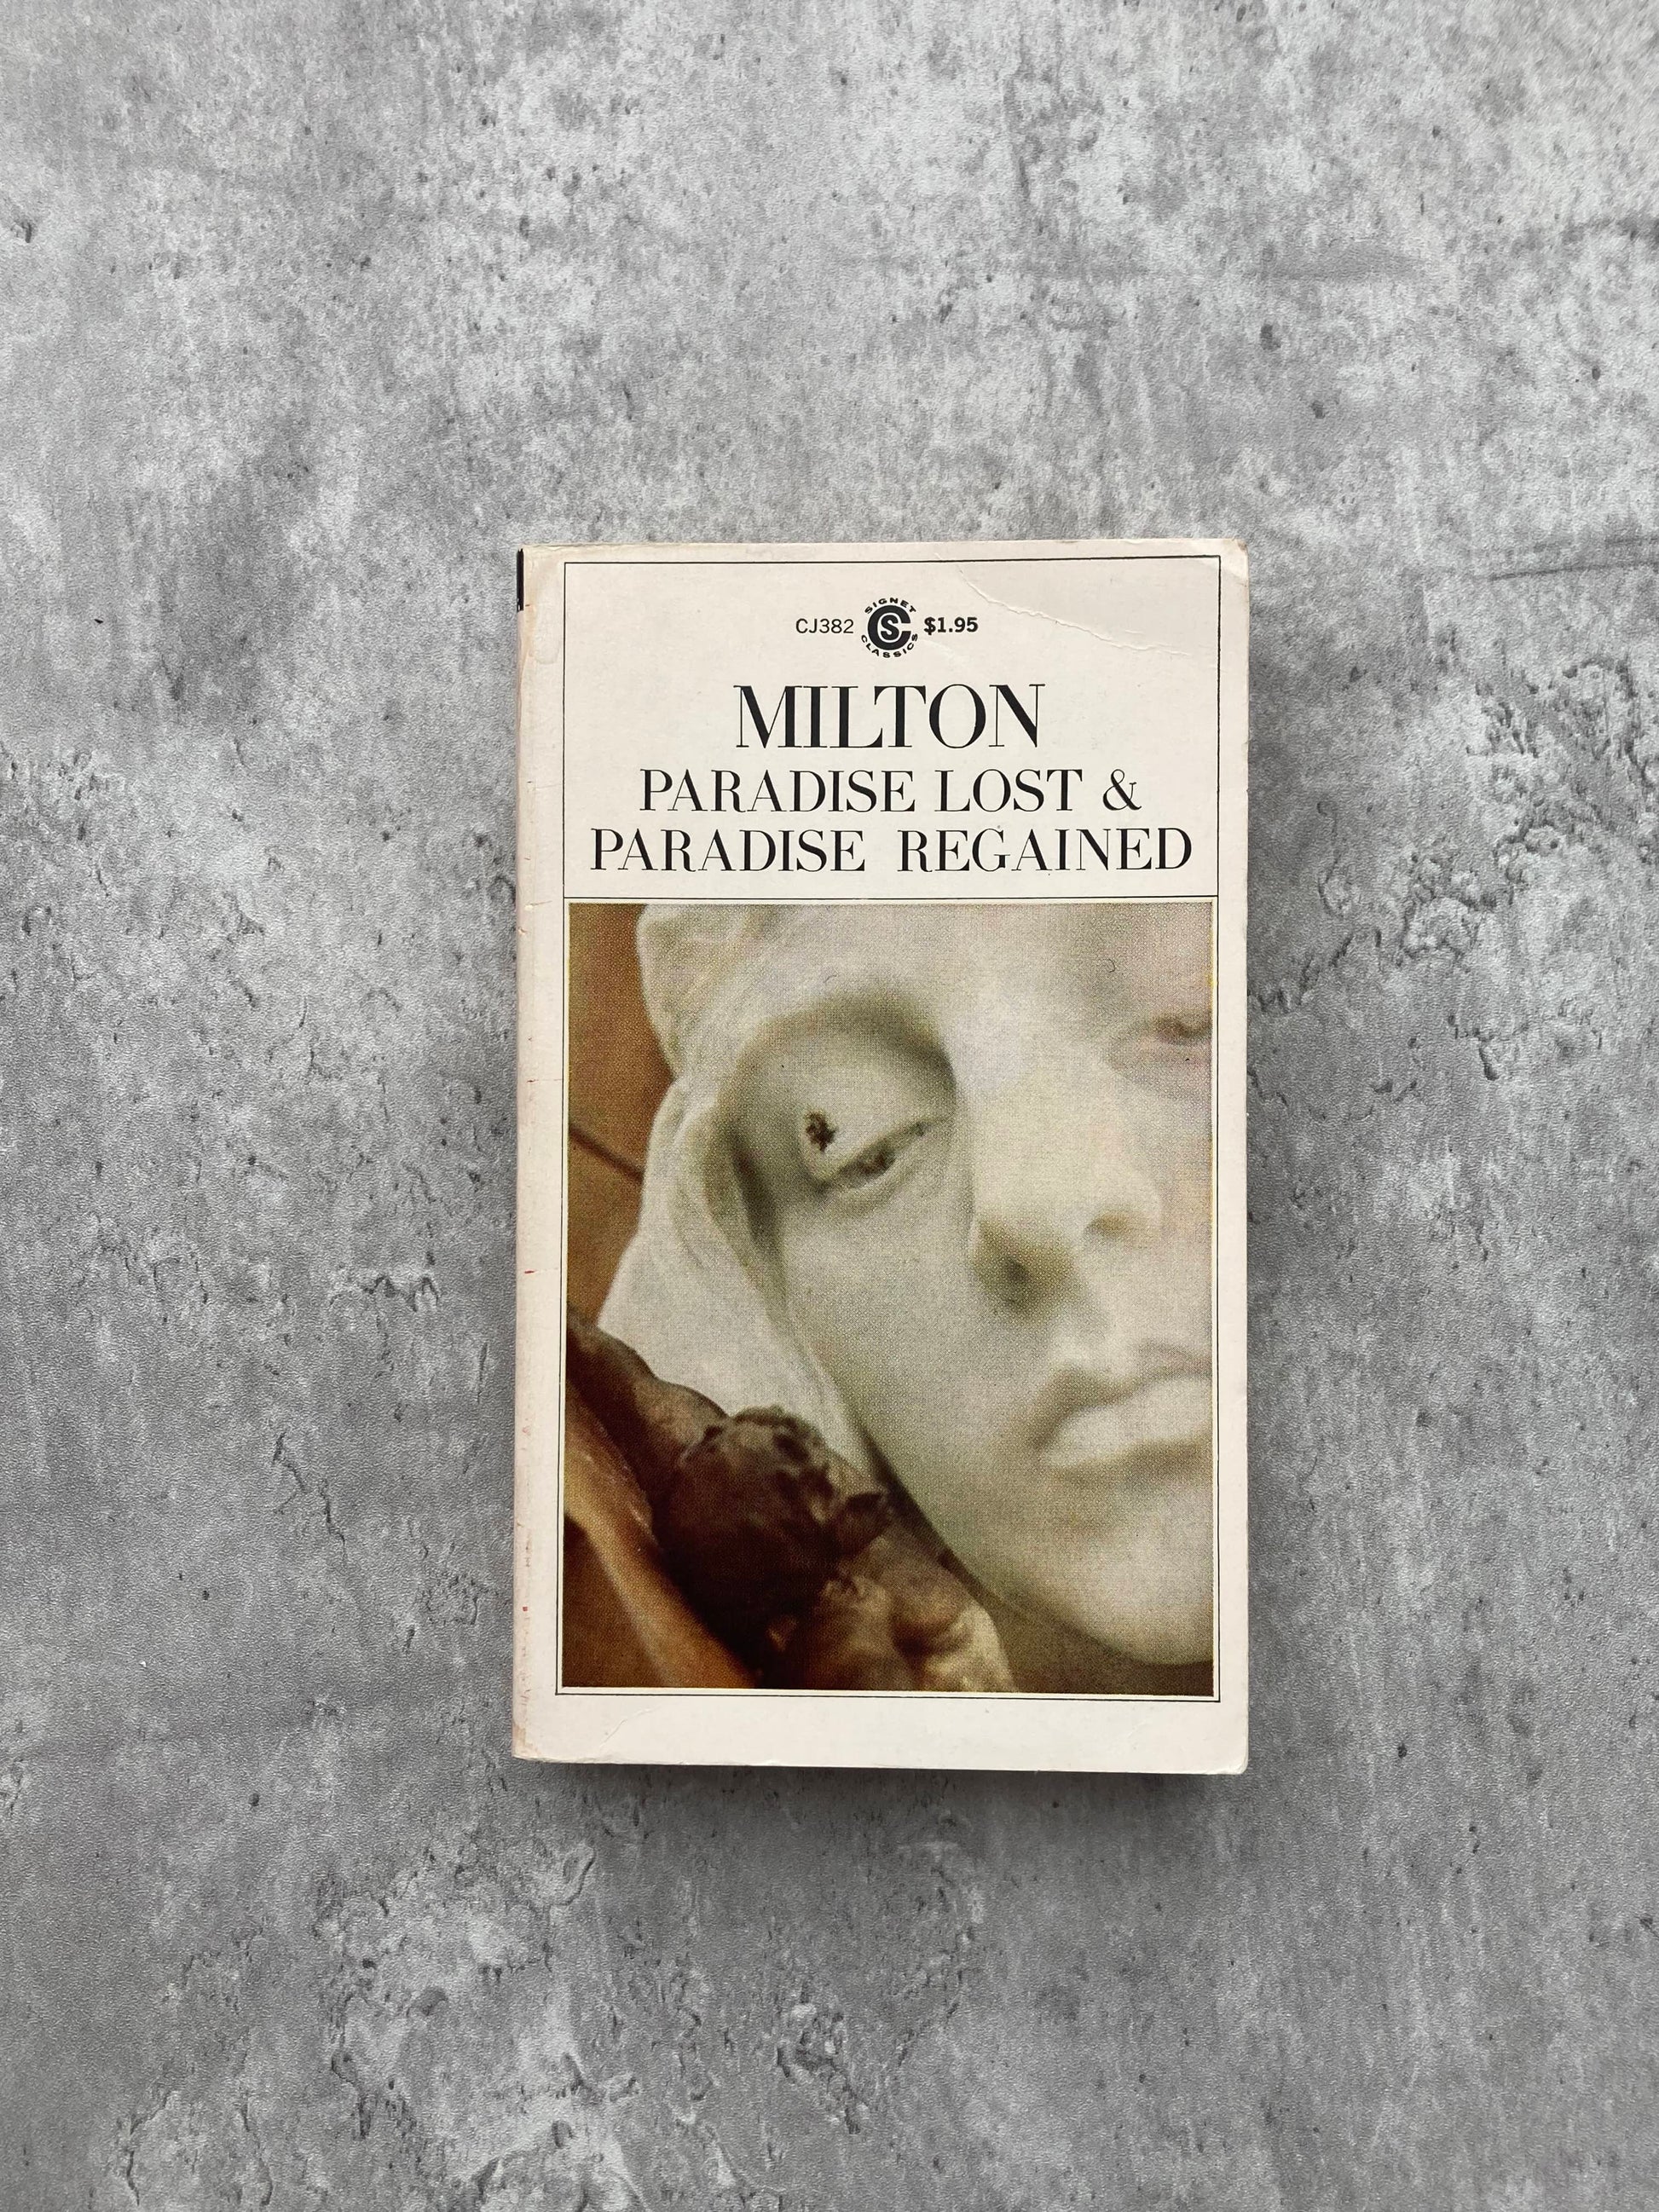 Paradise Lost & Paradise Regained by John Milton. Shop all new and used books online at The Stone Circle, the only online bookstore in Los Angeles, California.